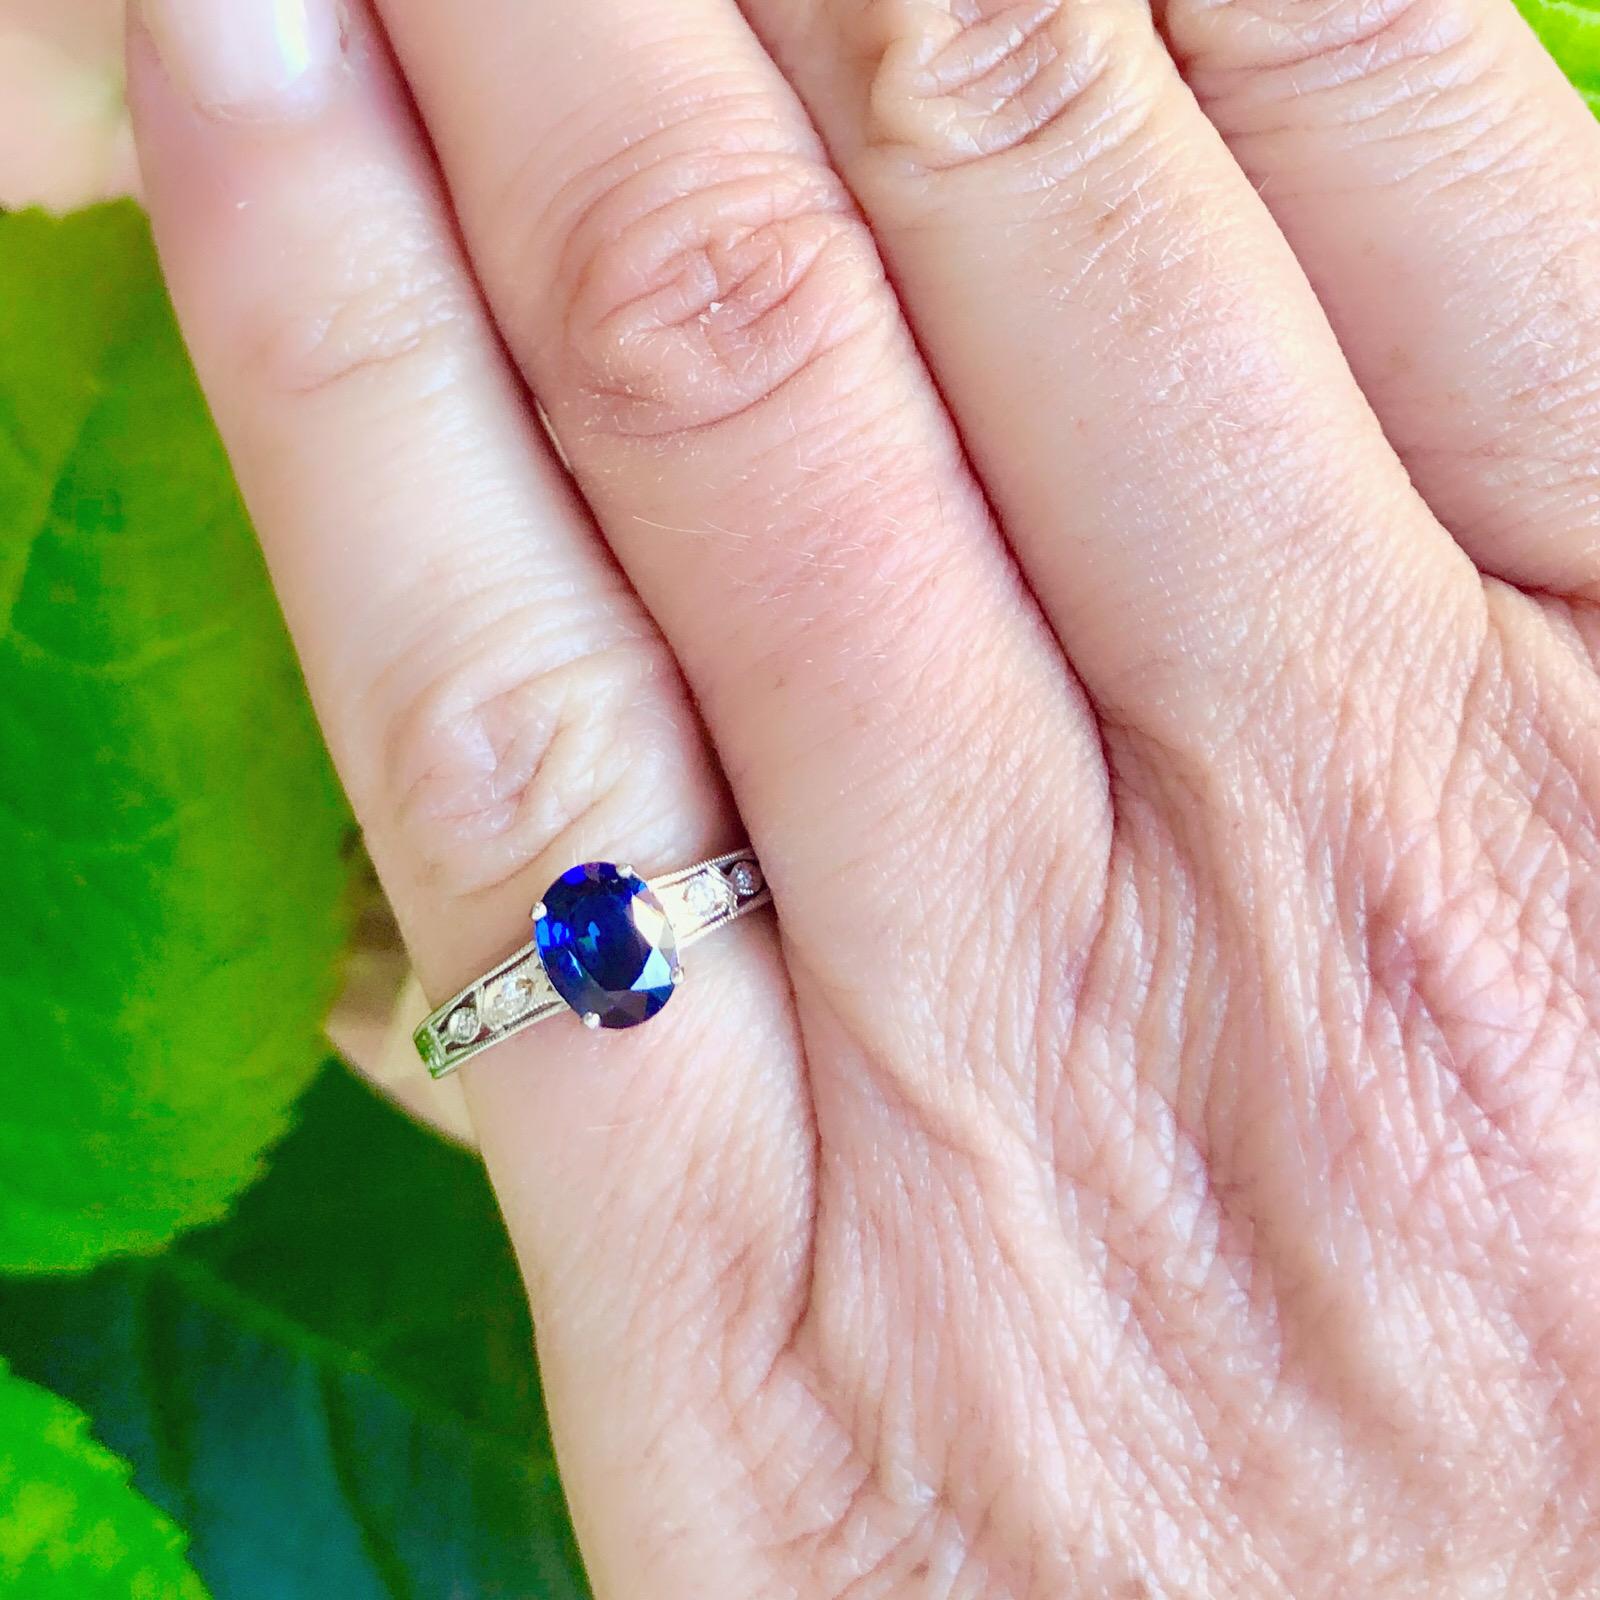 This classic design 18k white gold ring features an oval-cut blue sapphire weighing 1.12 carats, with 4 round brilliant-cut diamond accents adding sparkle and shine. The ring weighs 2.4 grams, and is currently size 5 3/4, with easy up or down